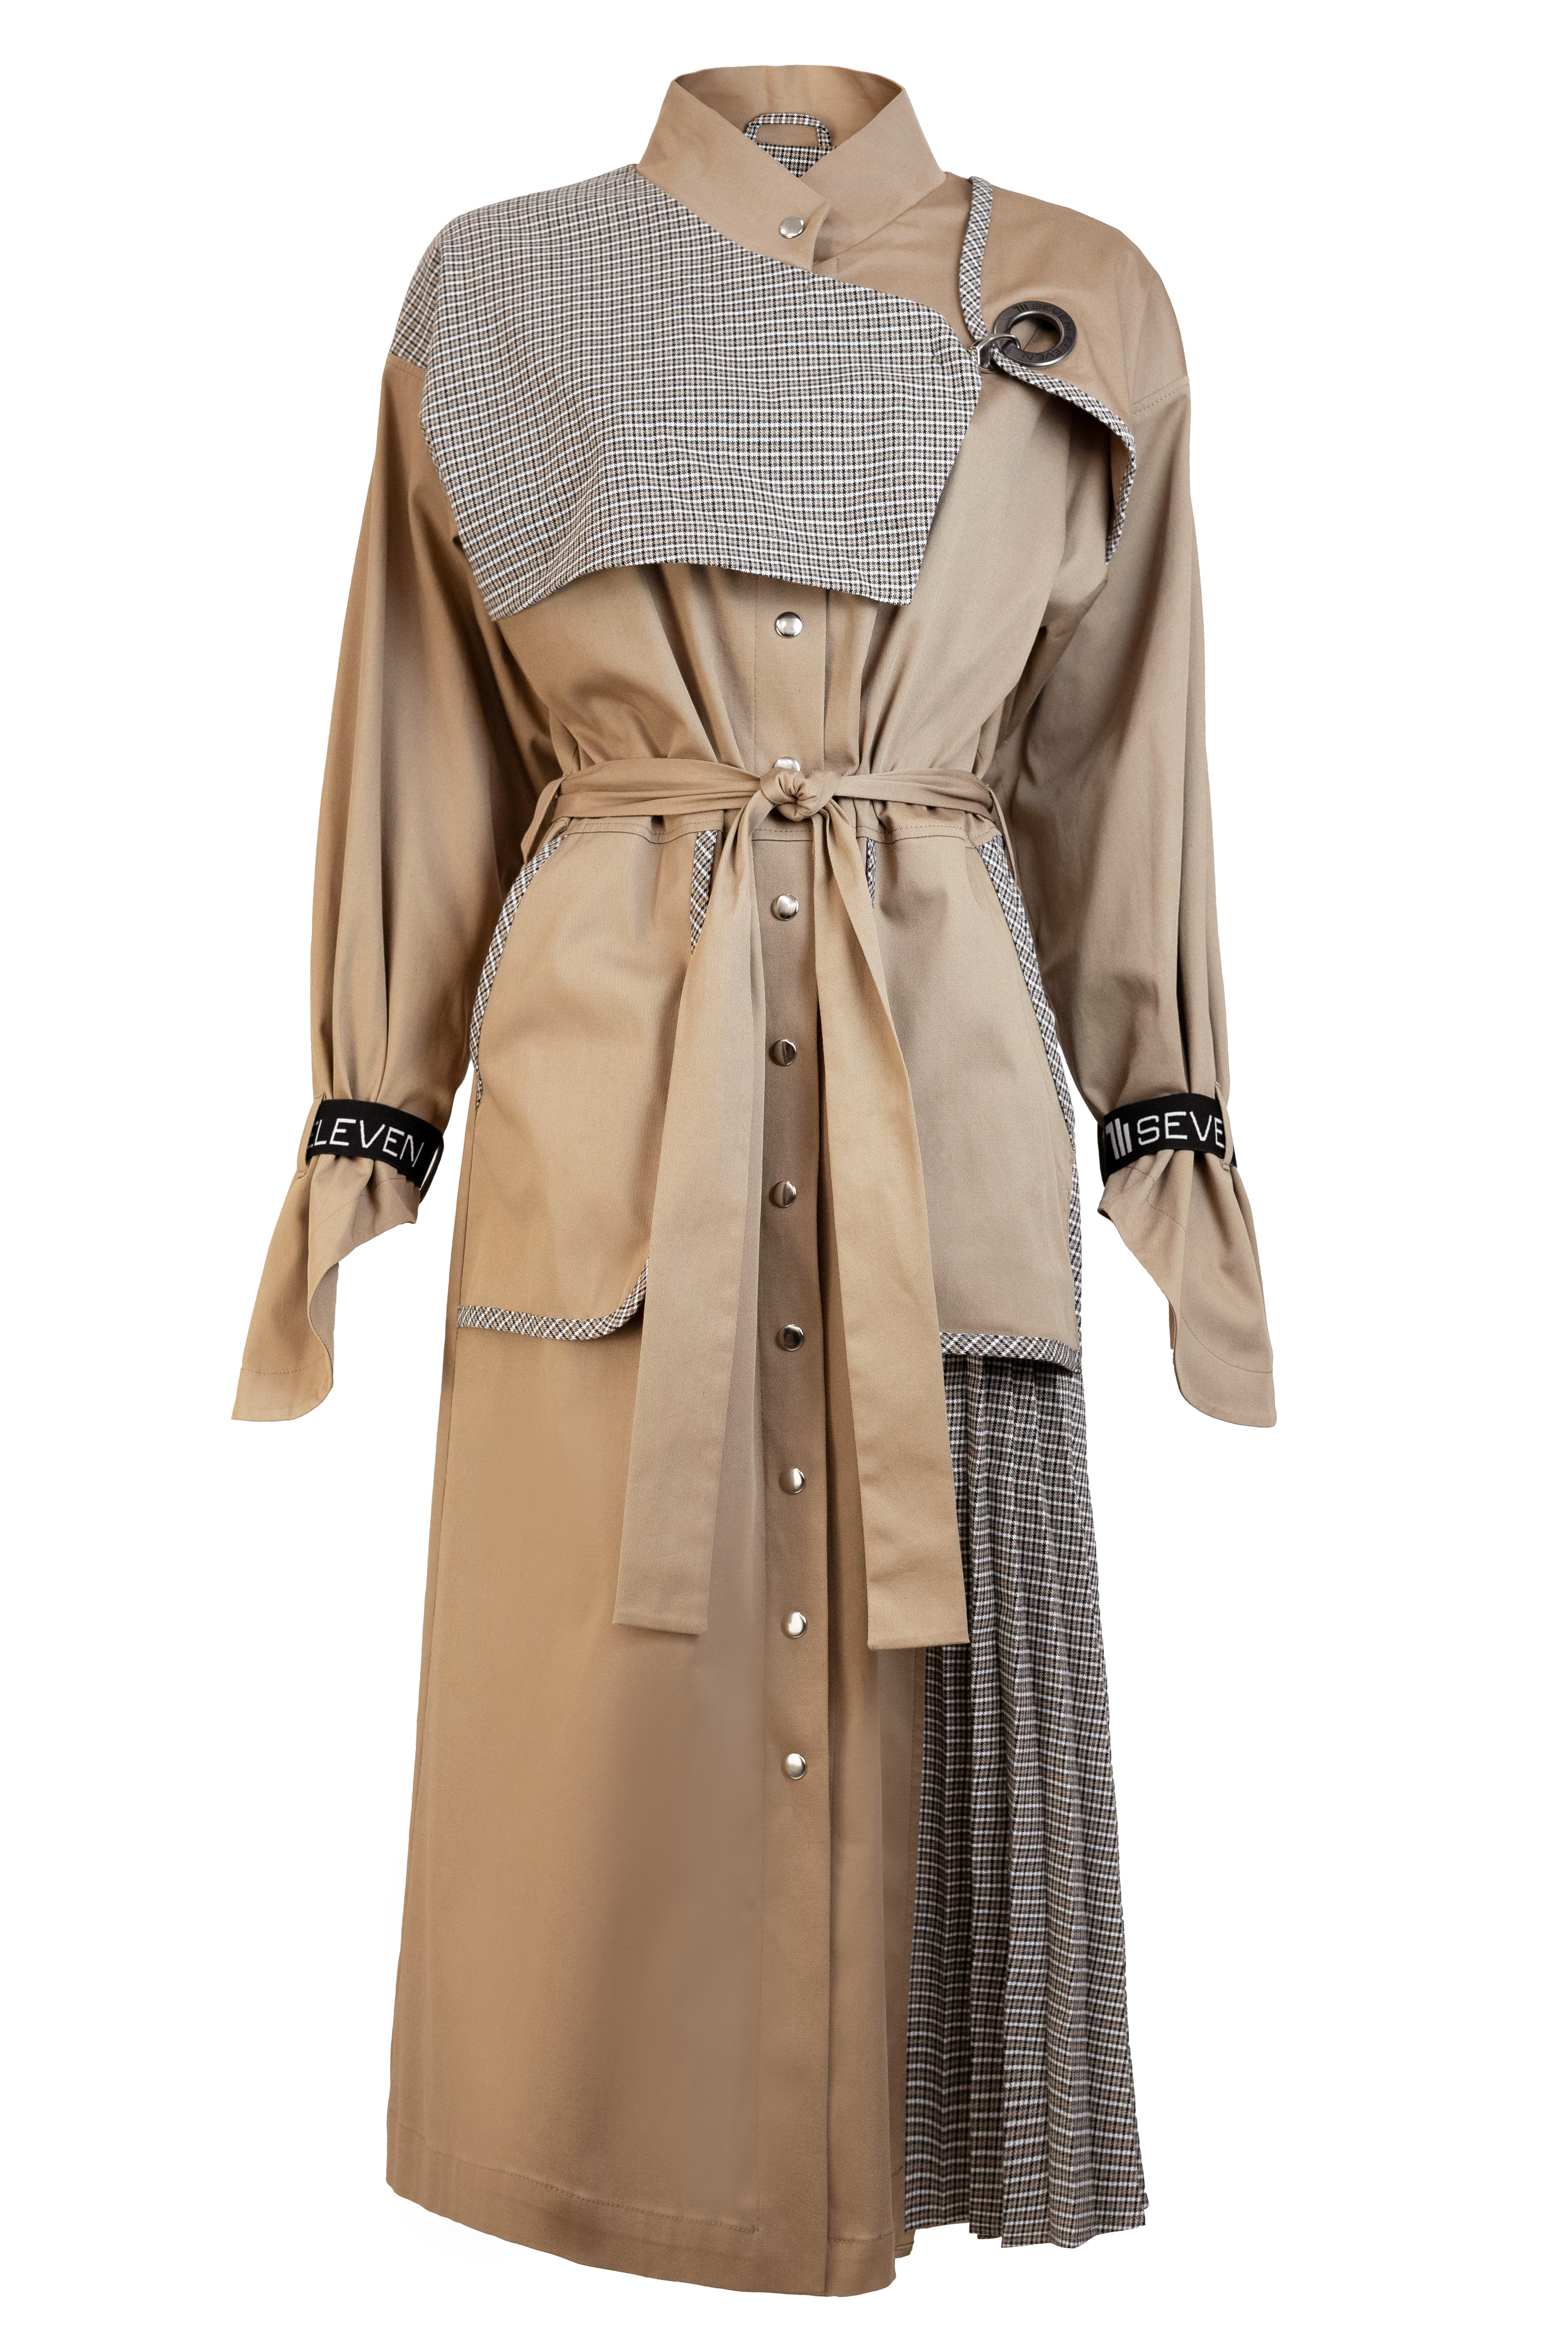 Beige pleated trench coat